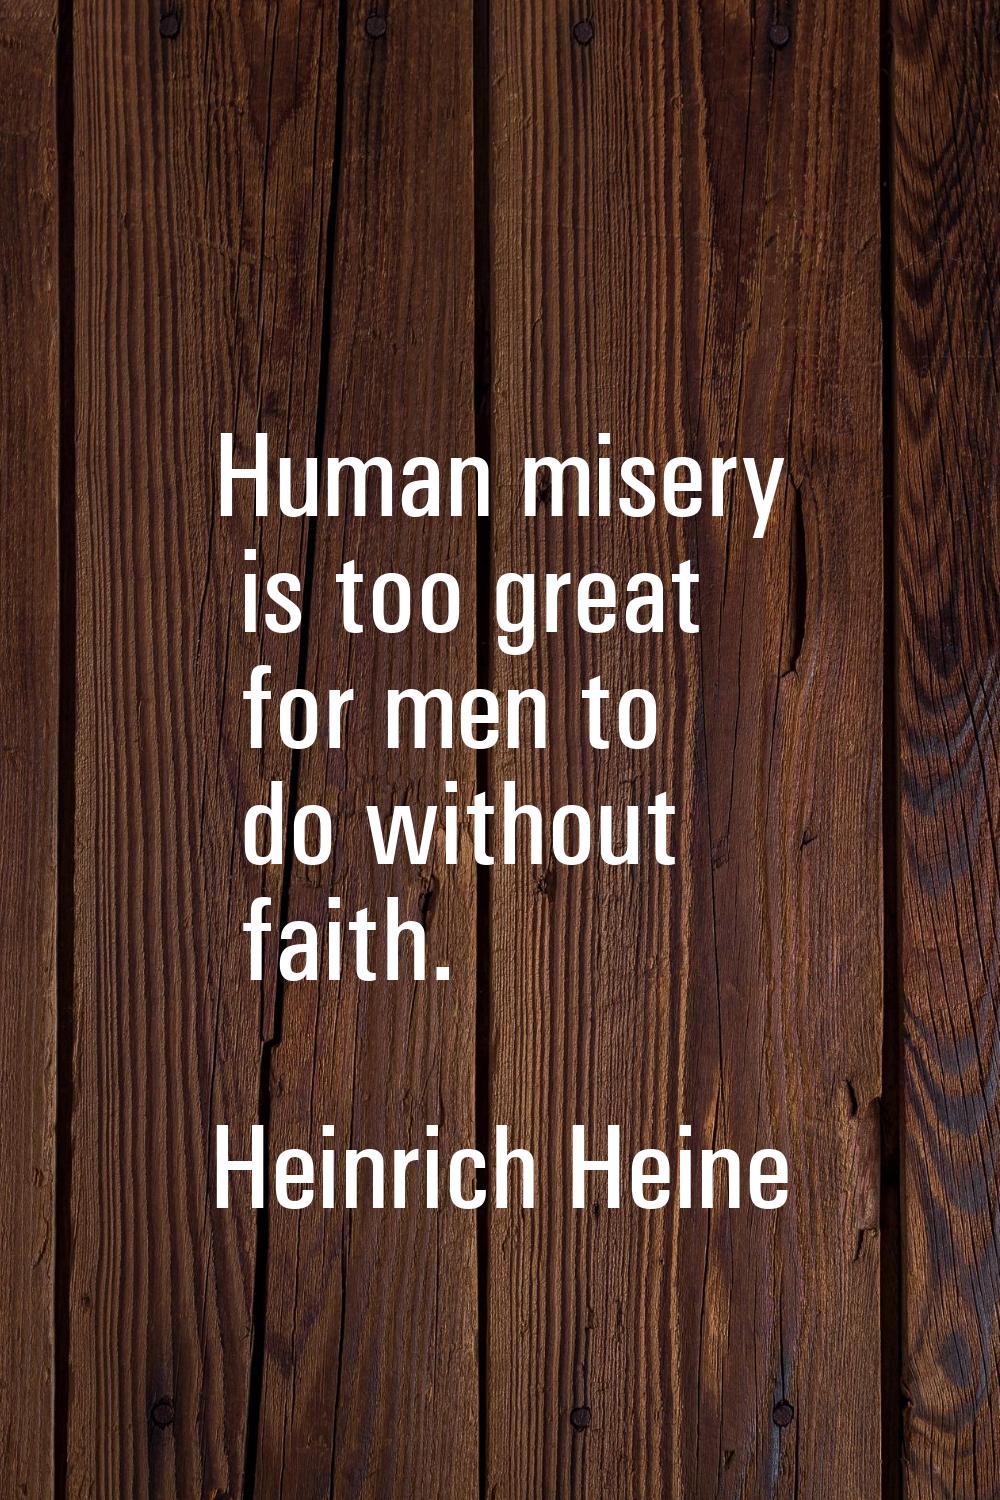 Human misery is too great for men to do without faith.